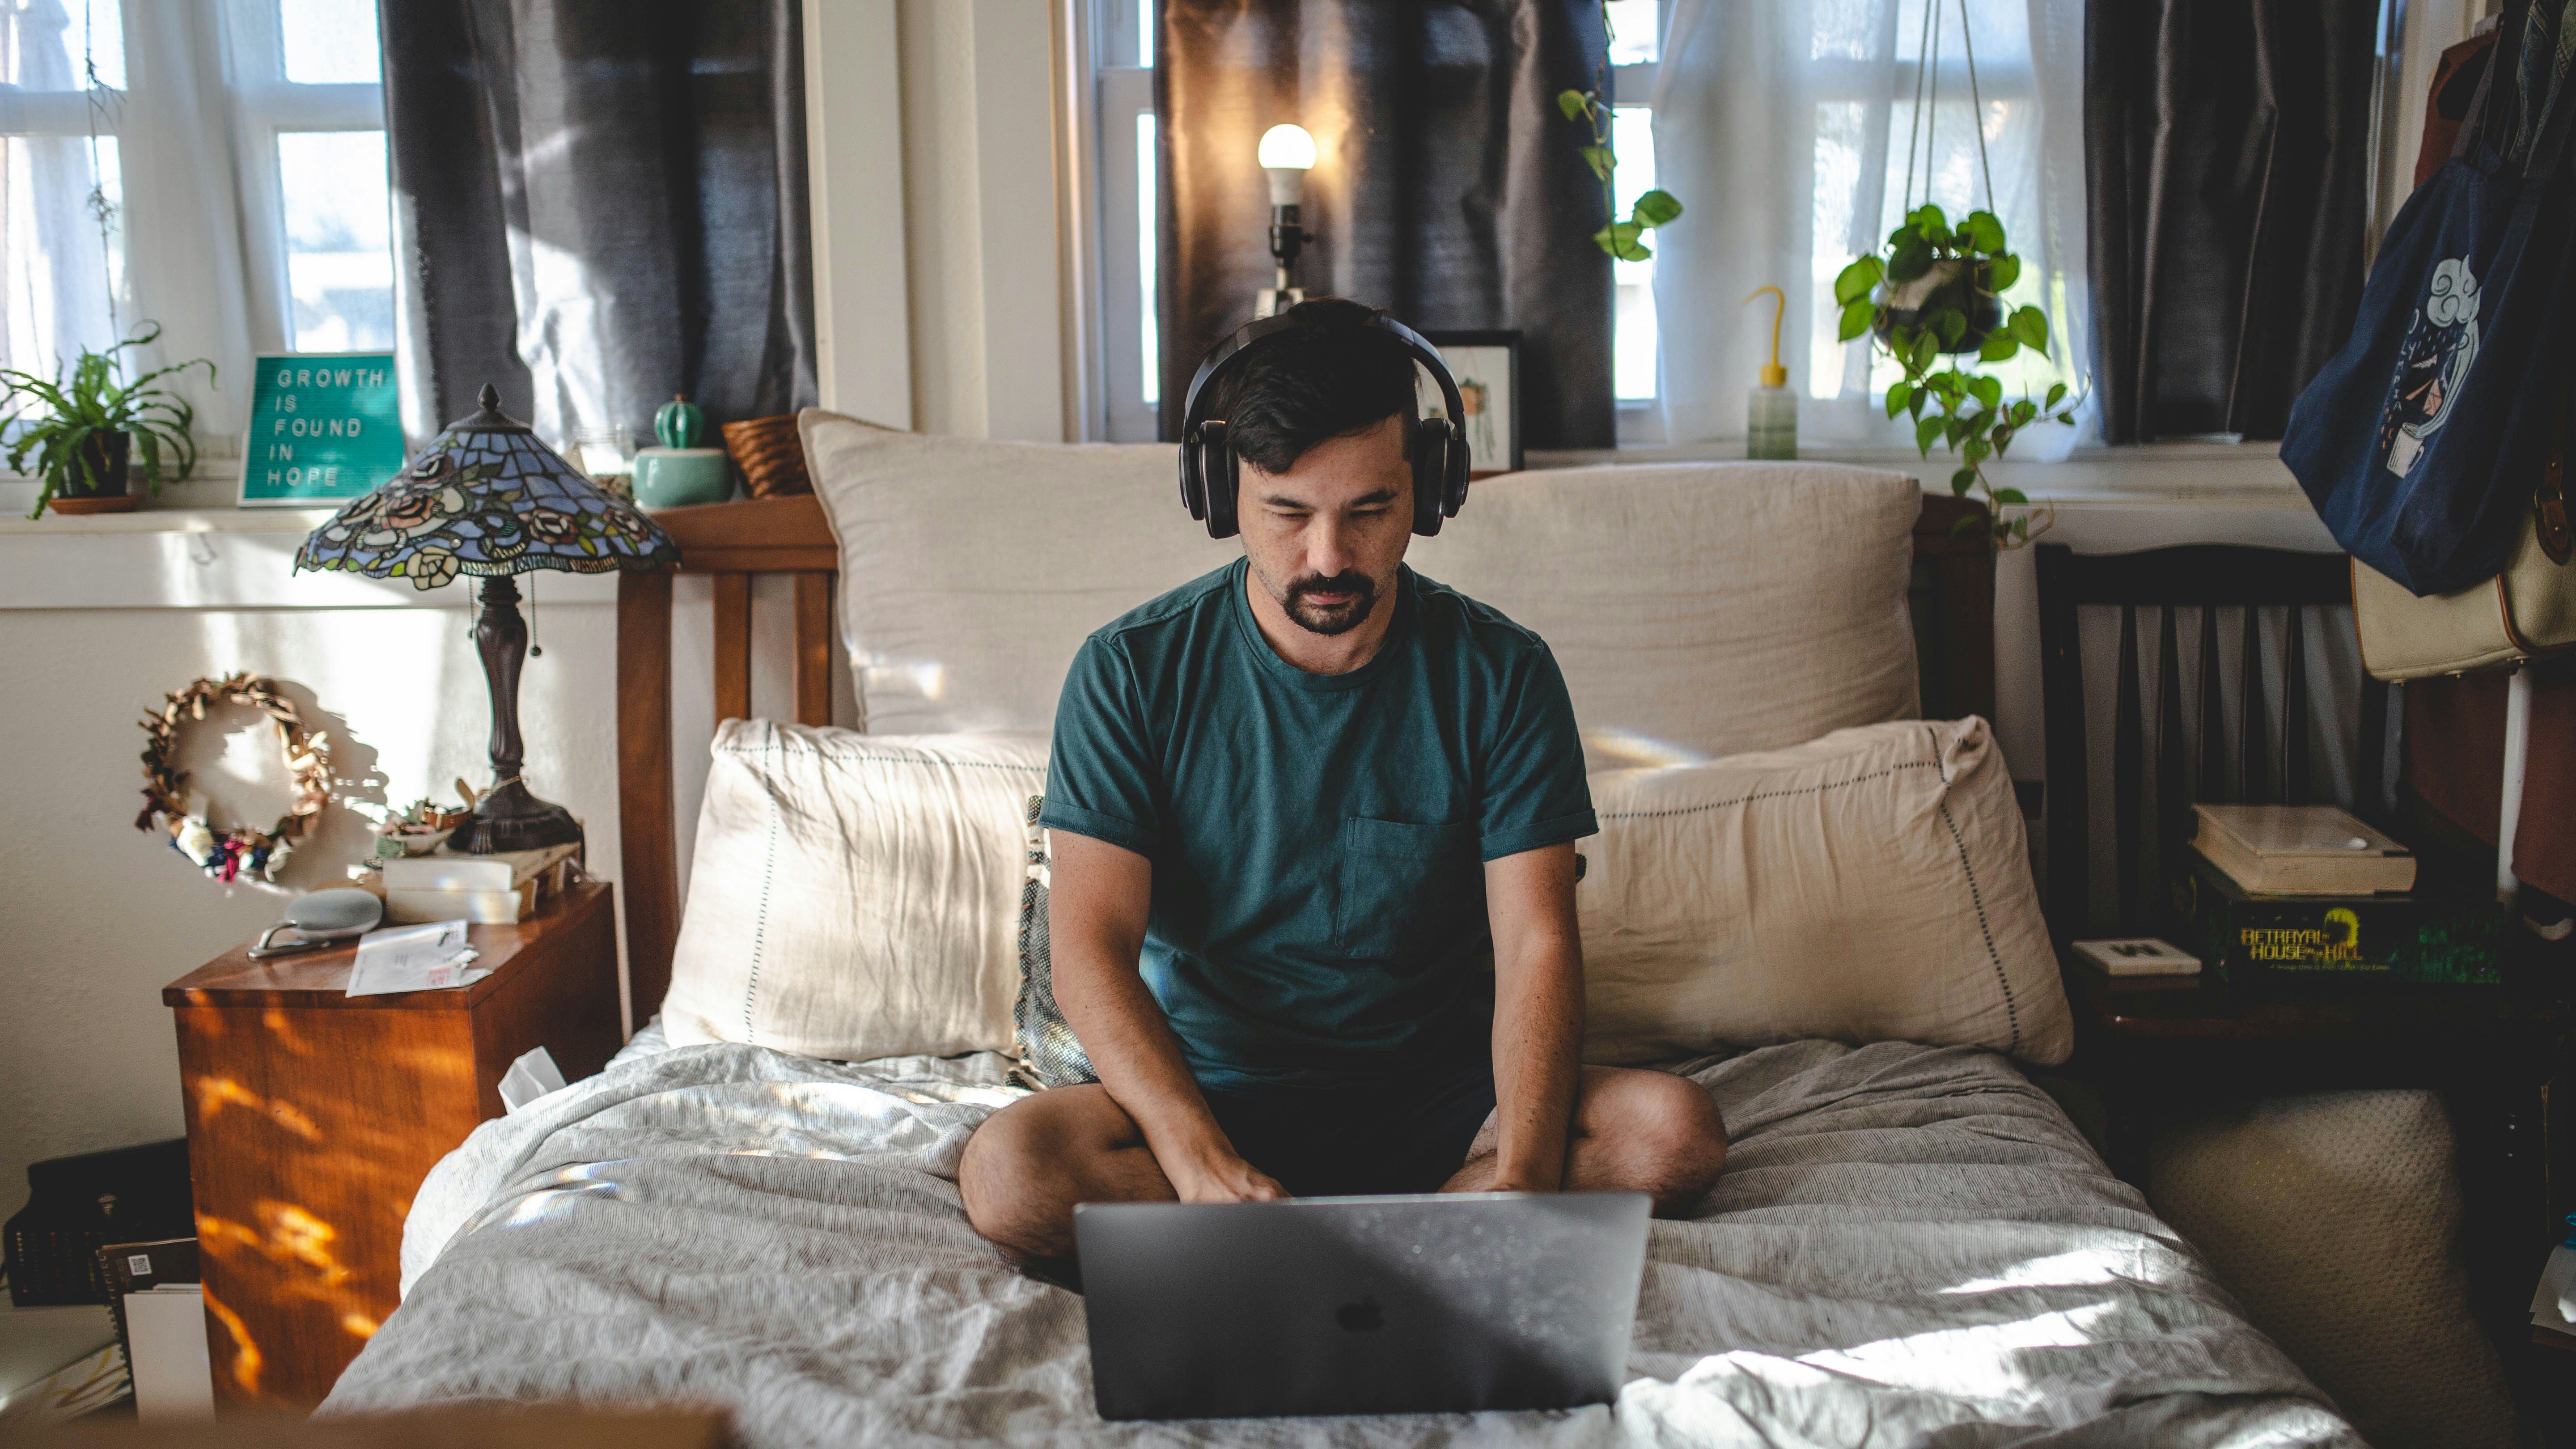 A masculine-appearing person sits cross-legged in bed looking down at a laptop, with headphones on. They are in a cluttered but cozy room, with plants, bright windows, and decorative items.